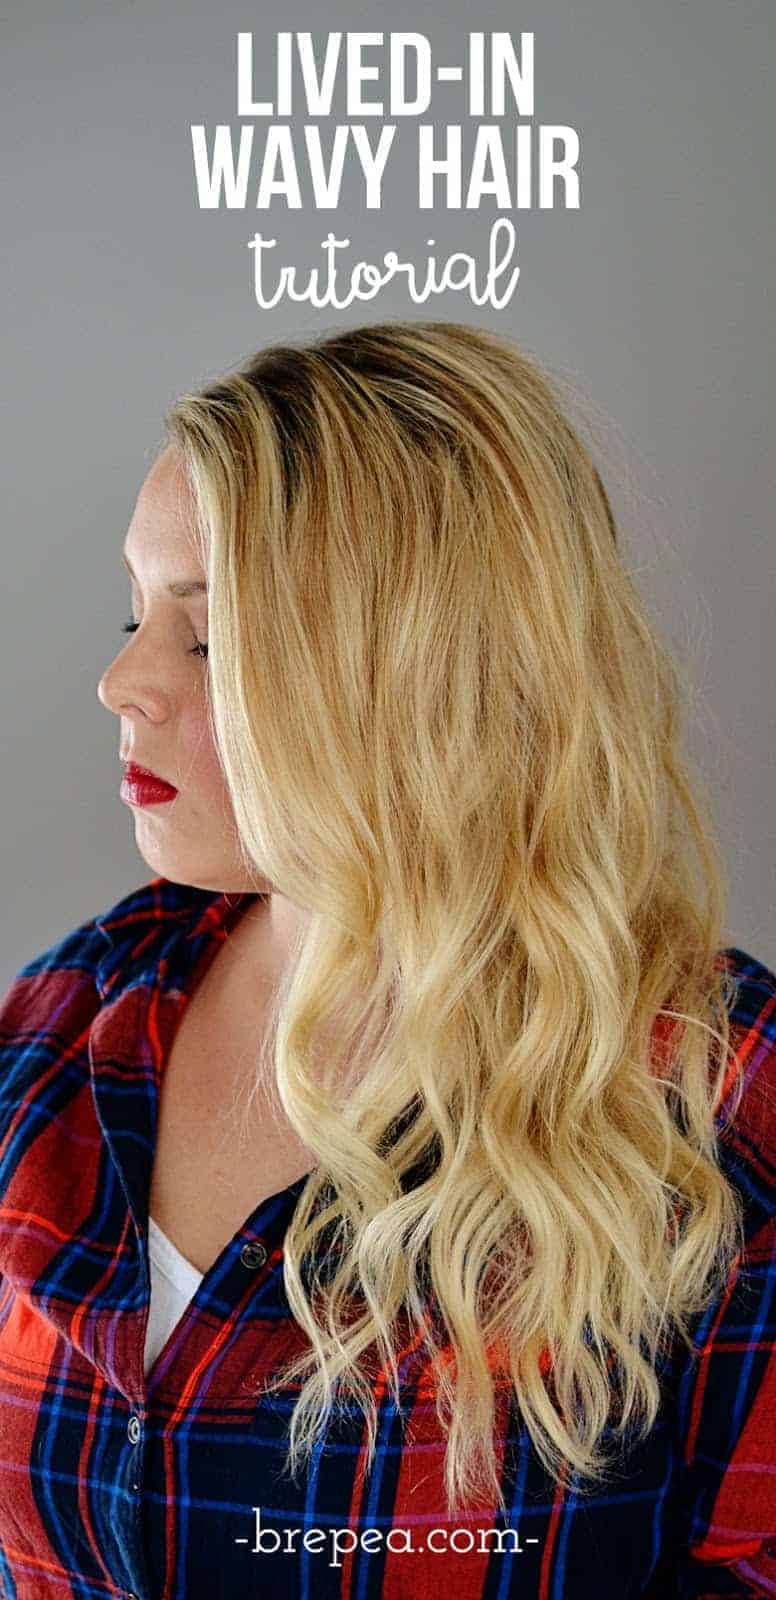 This wavy hair tutorial is perfect for long or short hairstyles. All you need is a curling iron or wand!